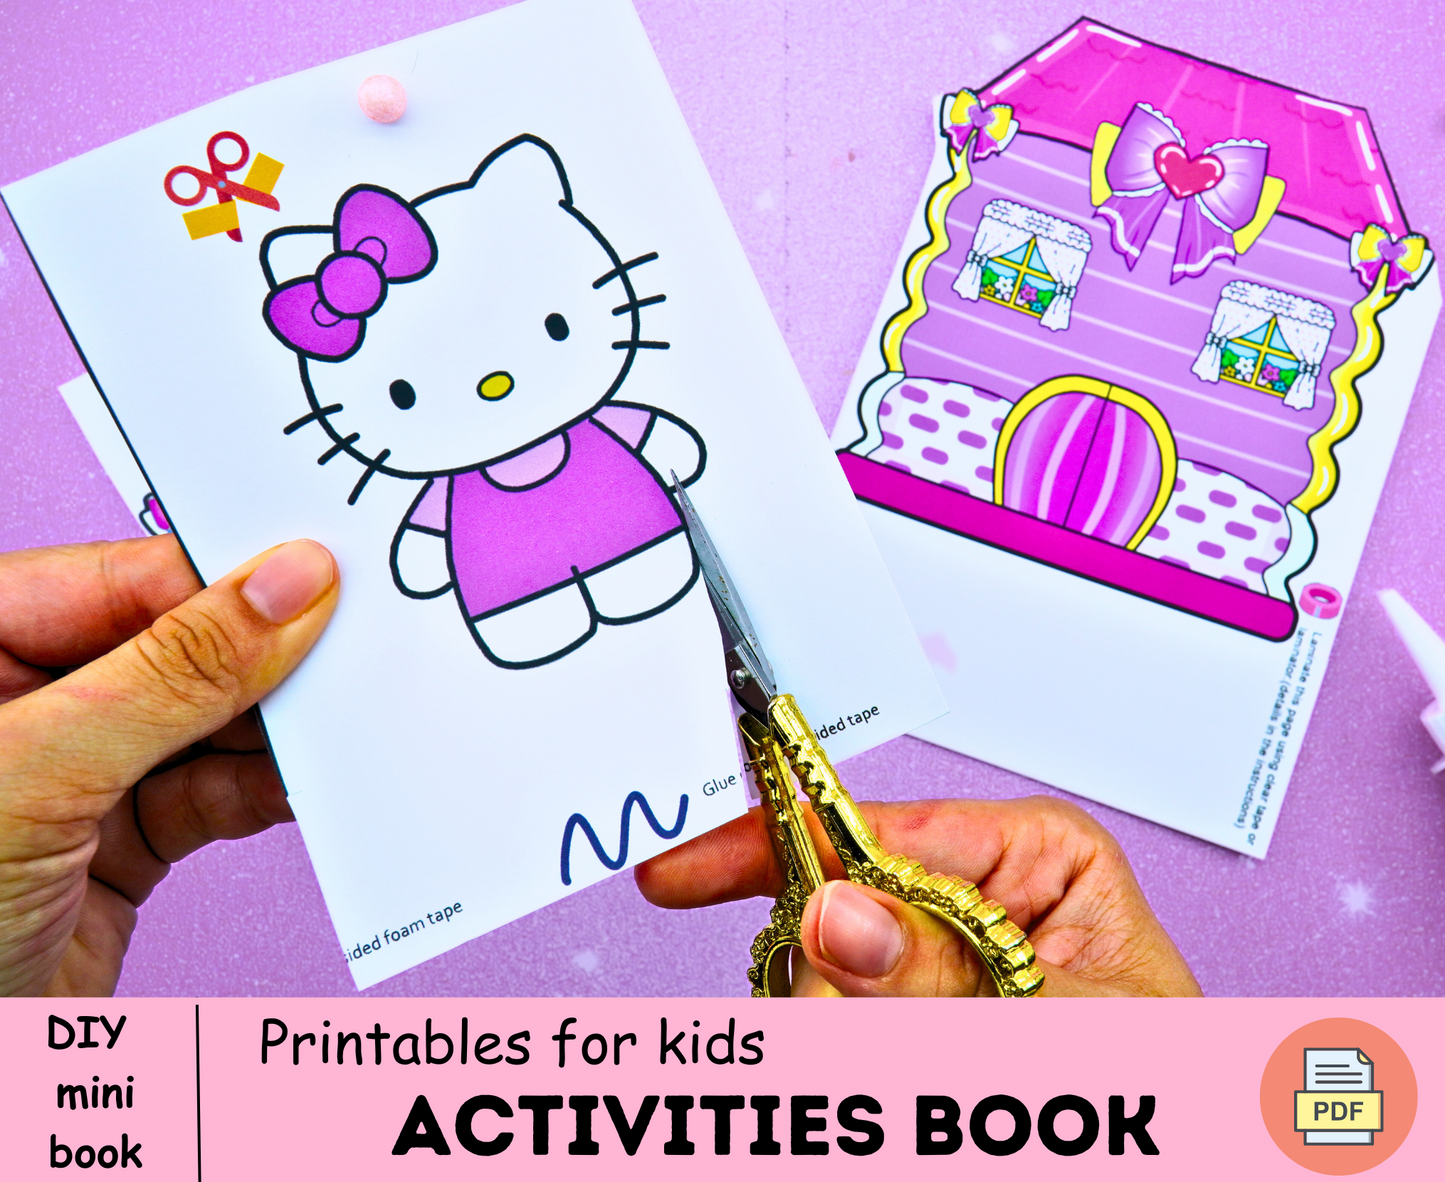 Pretty Toca Boca vs Hello Kitty paper dollhouse🌈Pink and Blue Handmade activity book | Toodler busy bookl | Toca boca printable DIY Crafts 🌈 Woa Doll Crafts